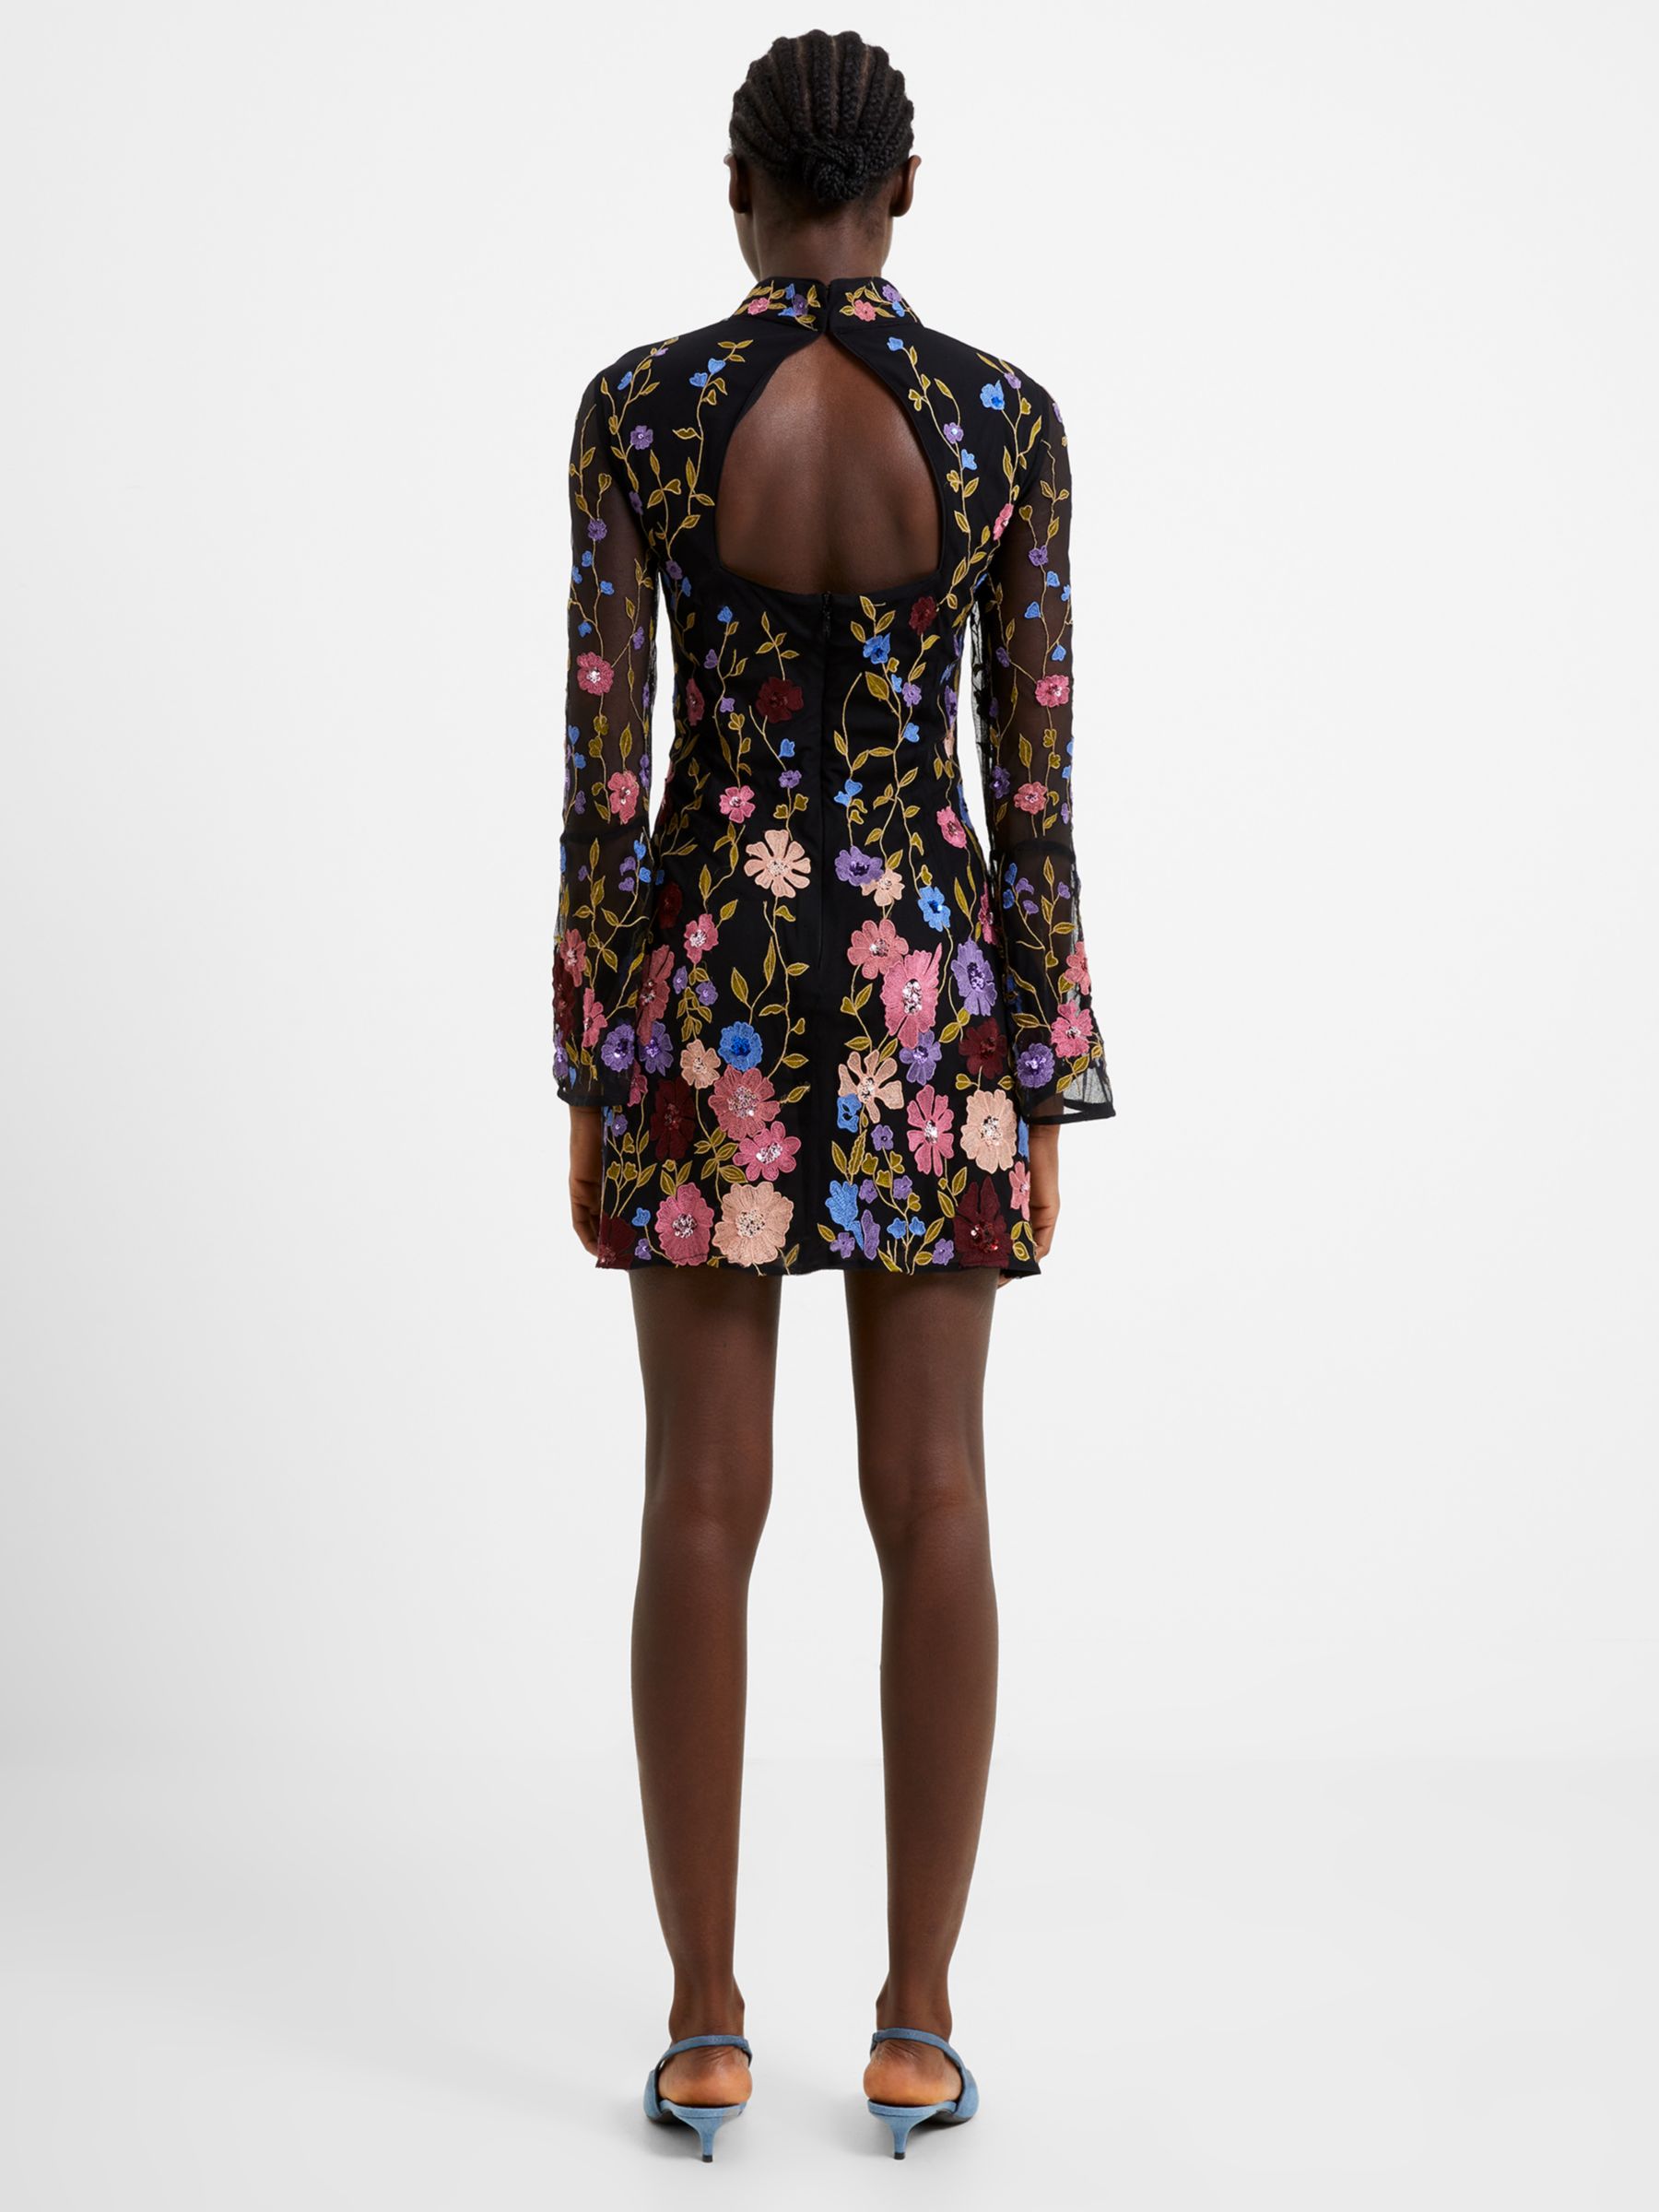 Buy French Connection Astrida Floral Mini Dress, Black/Multi Online at johnlewis.com